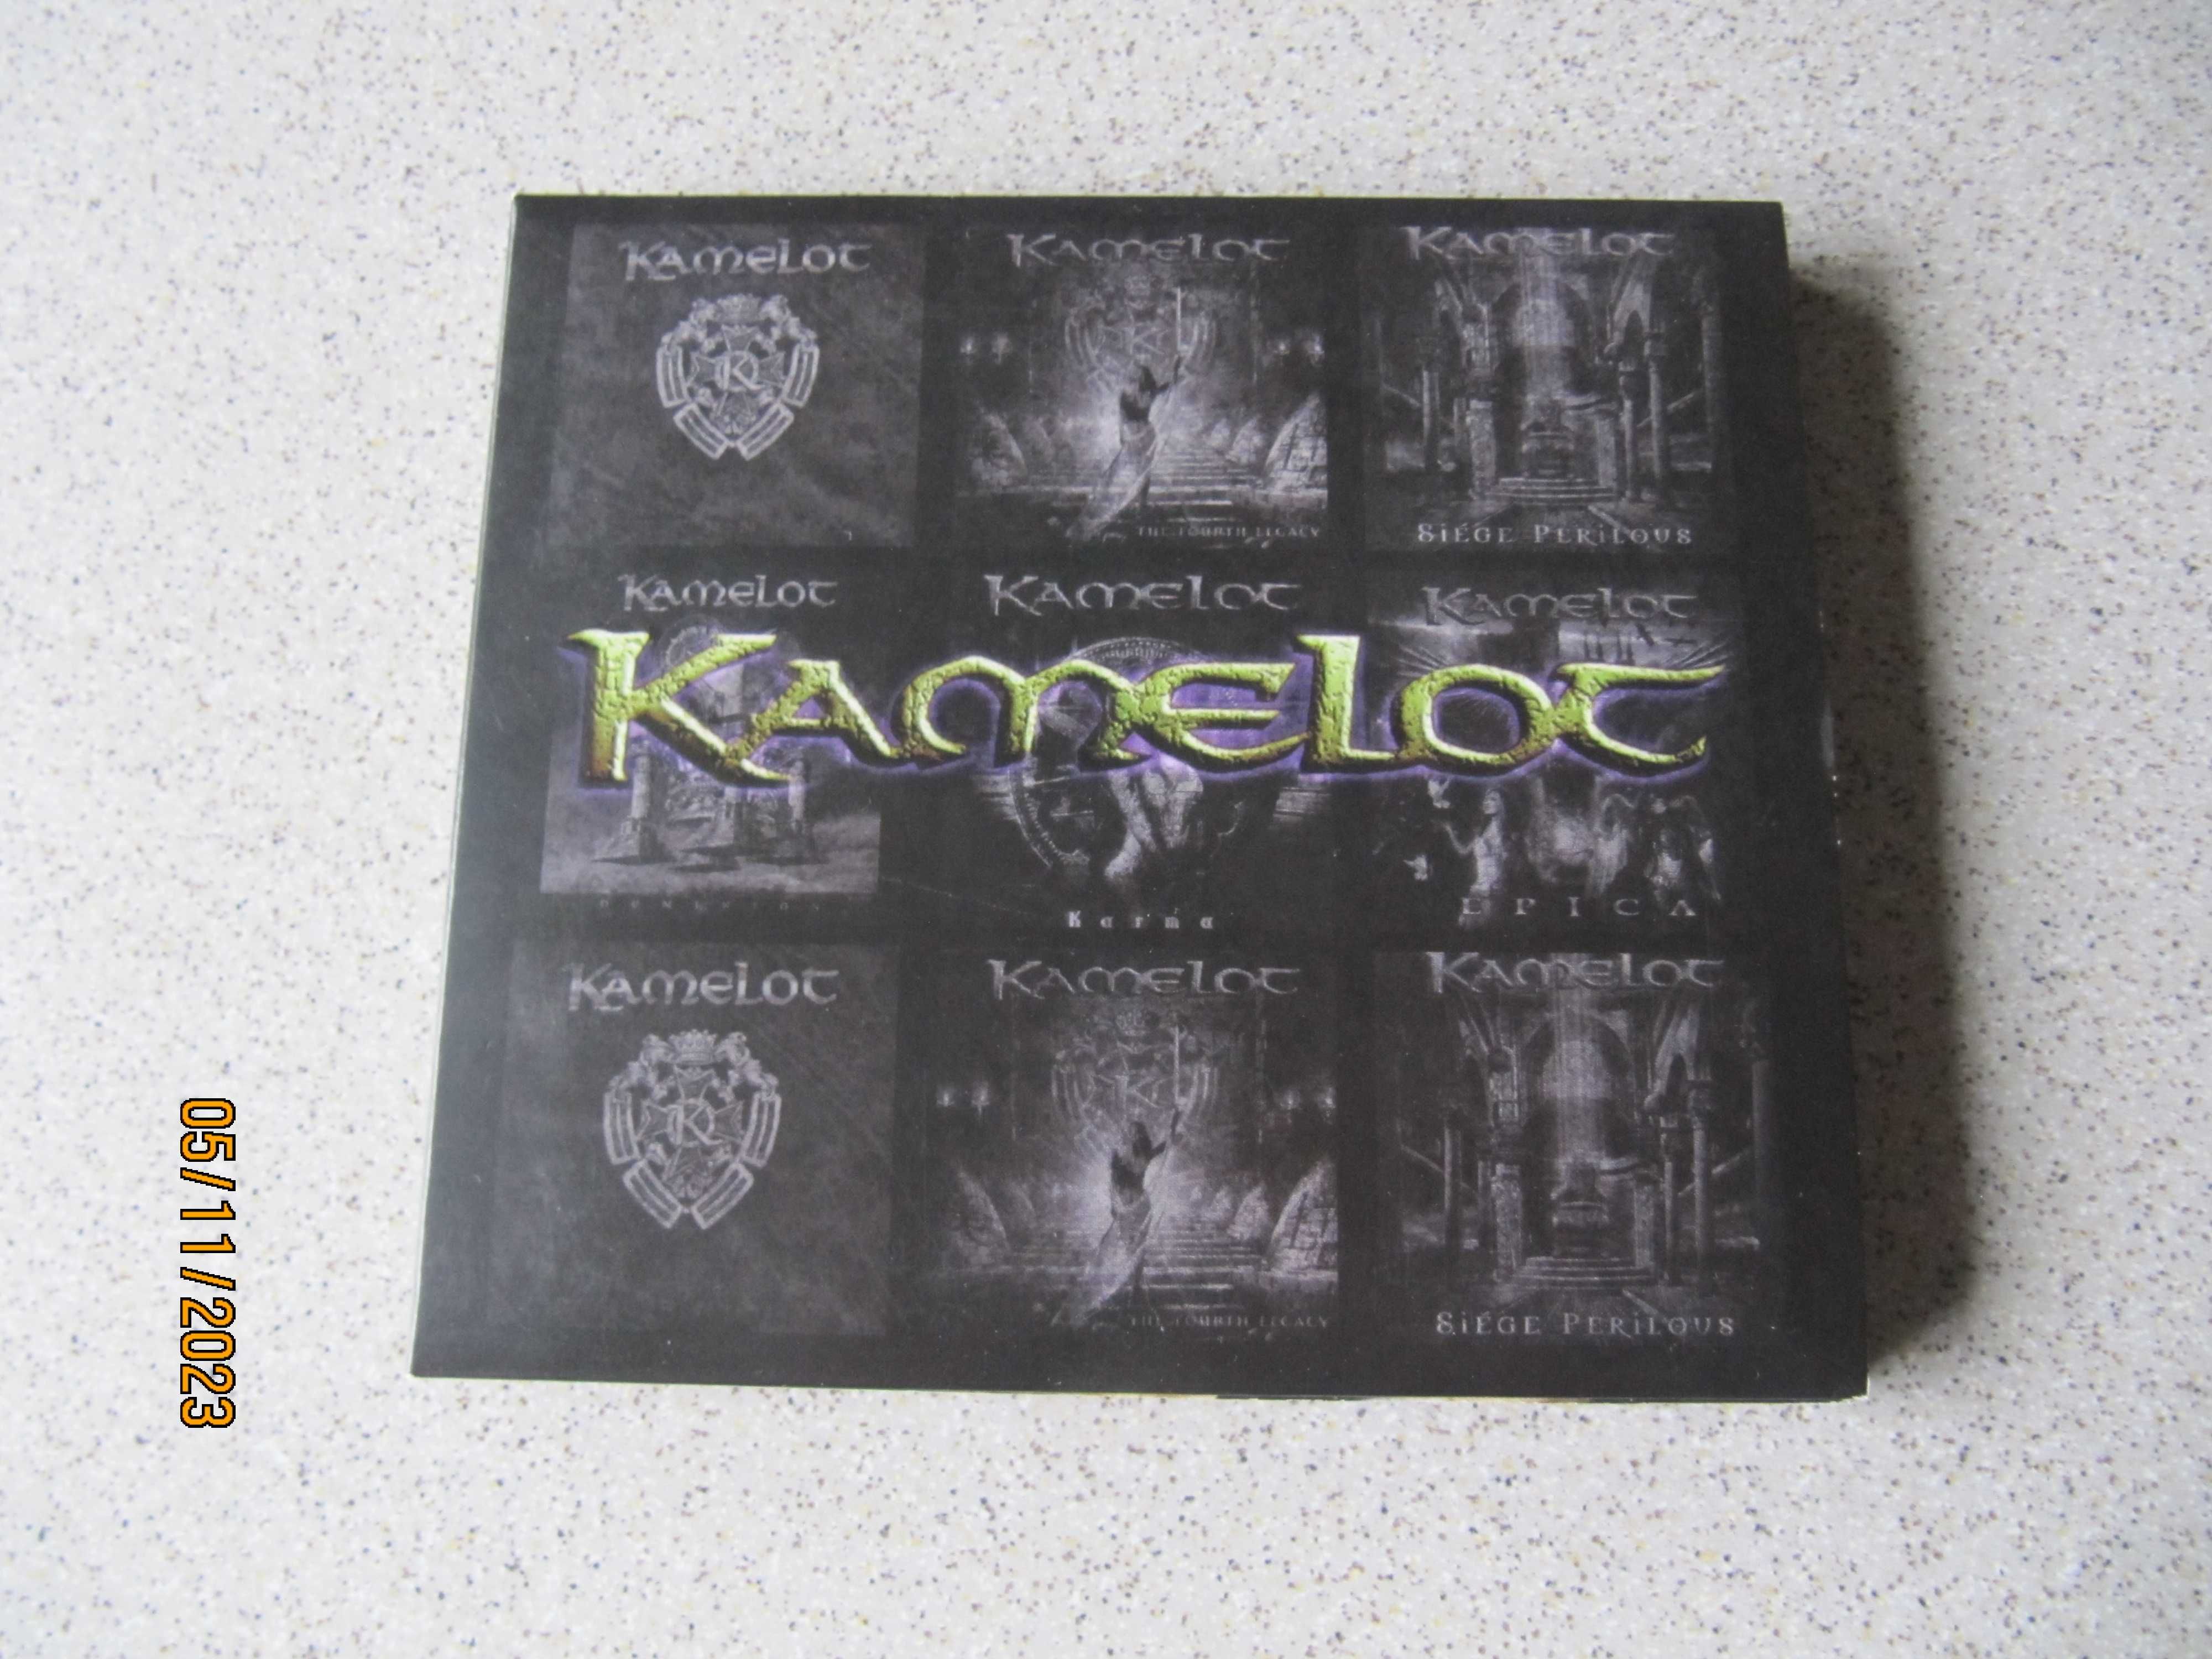 2CD - Kamelot – Where I Reign - Of The Noise Years 1995/2003